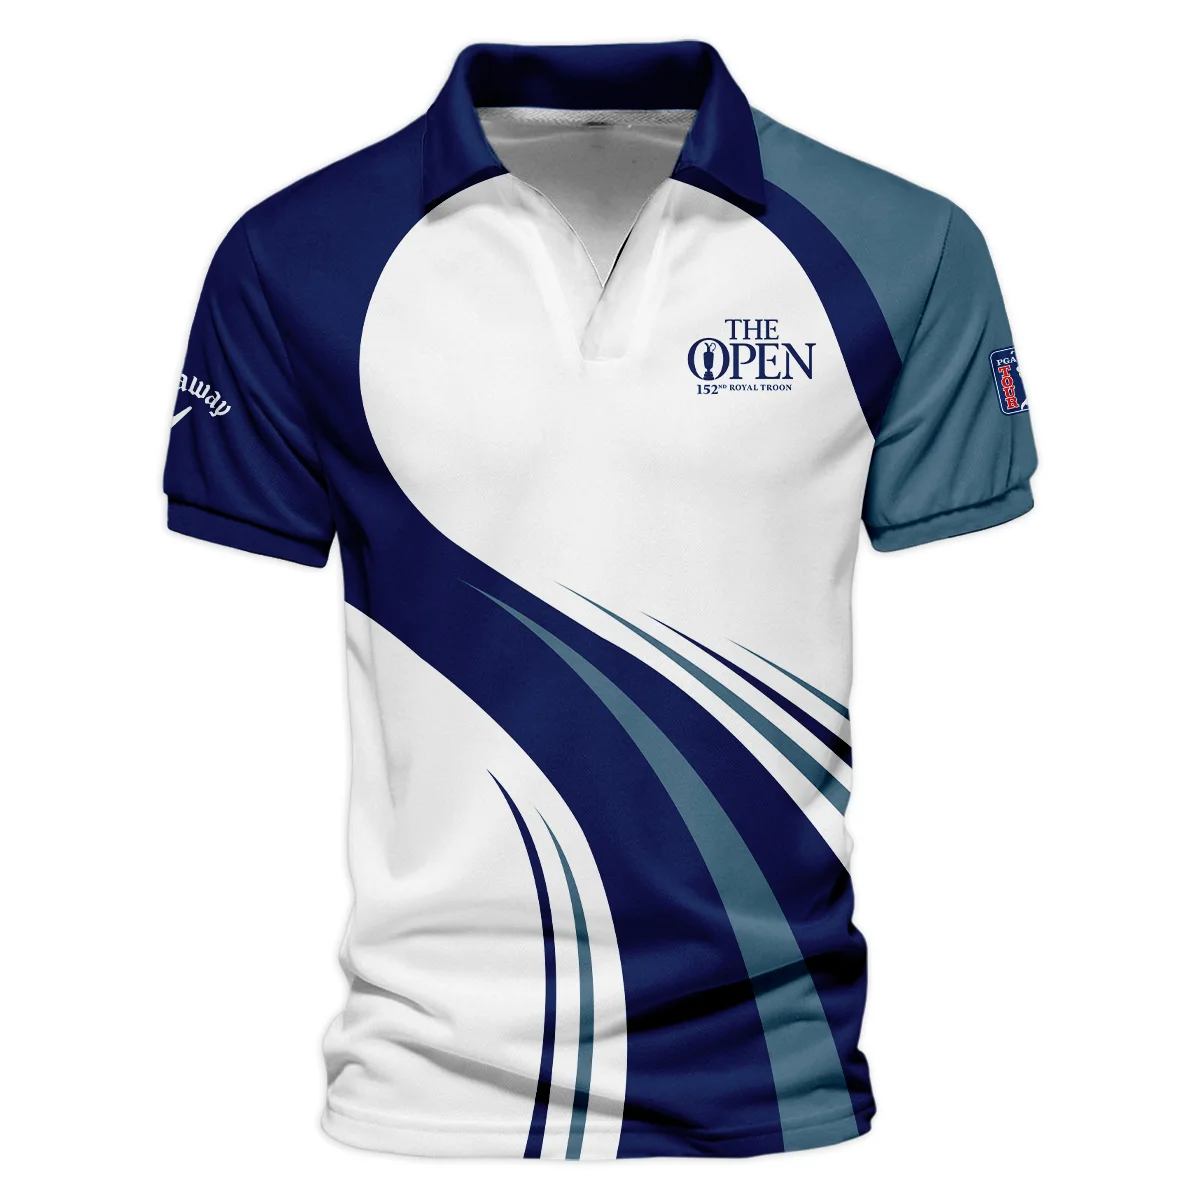 152nd Open Championship Callaway White Mostly Desaturated Dark Blue Vneck Polo Shirt All Over Prints  HOTOP270624A02CLWZVPL